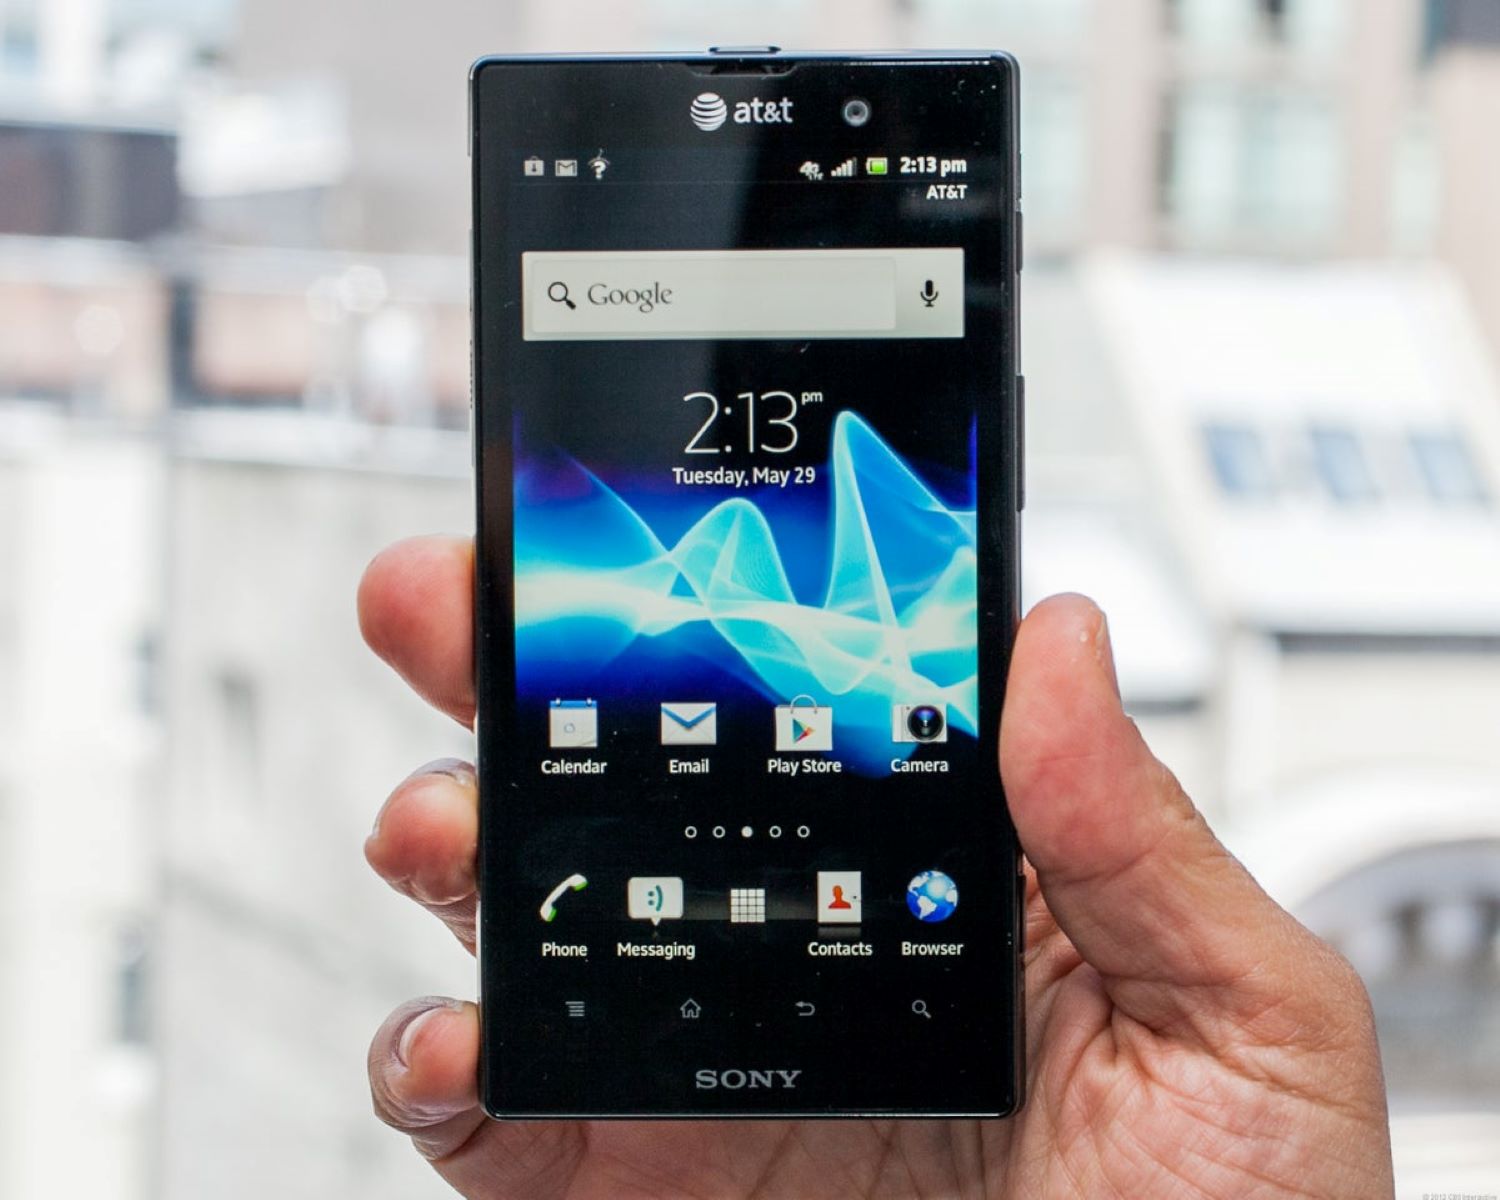 Managing Photos: Deleting On Sony Xperia Ion